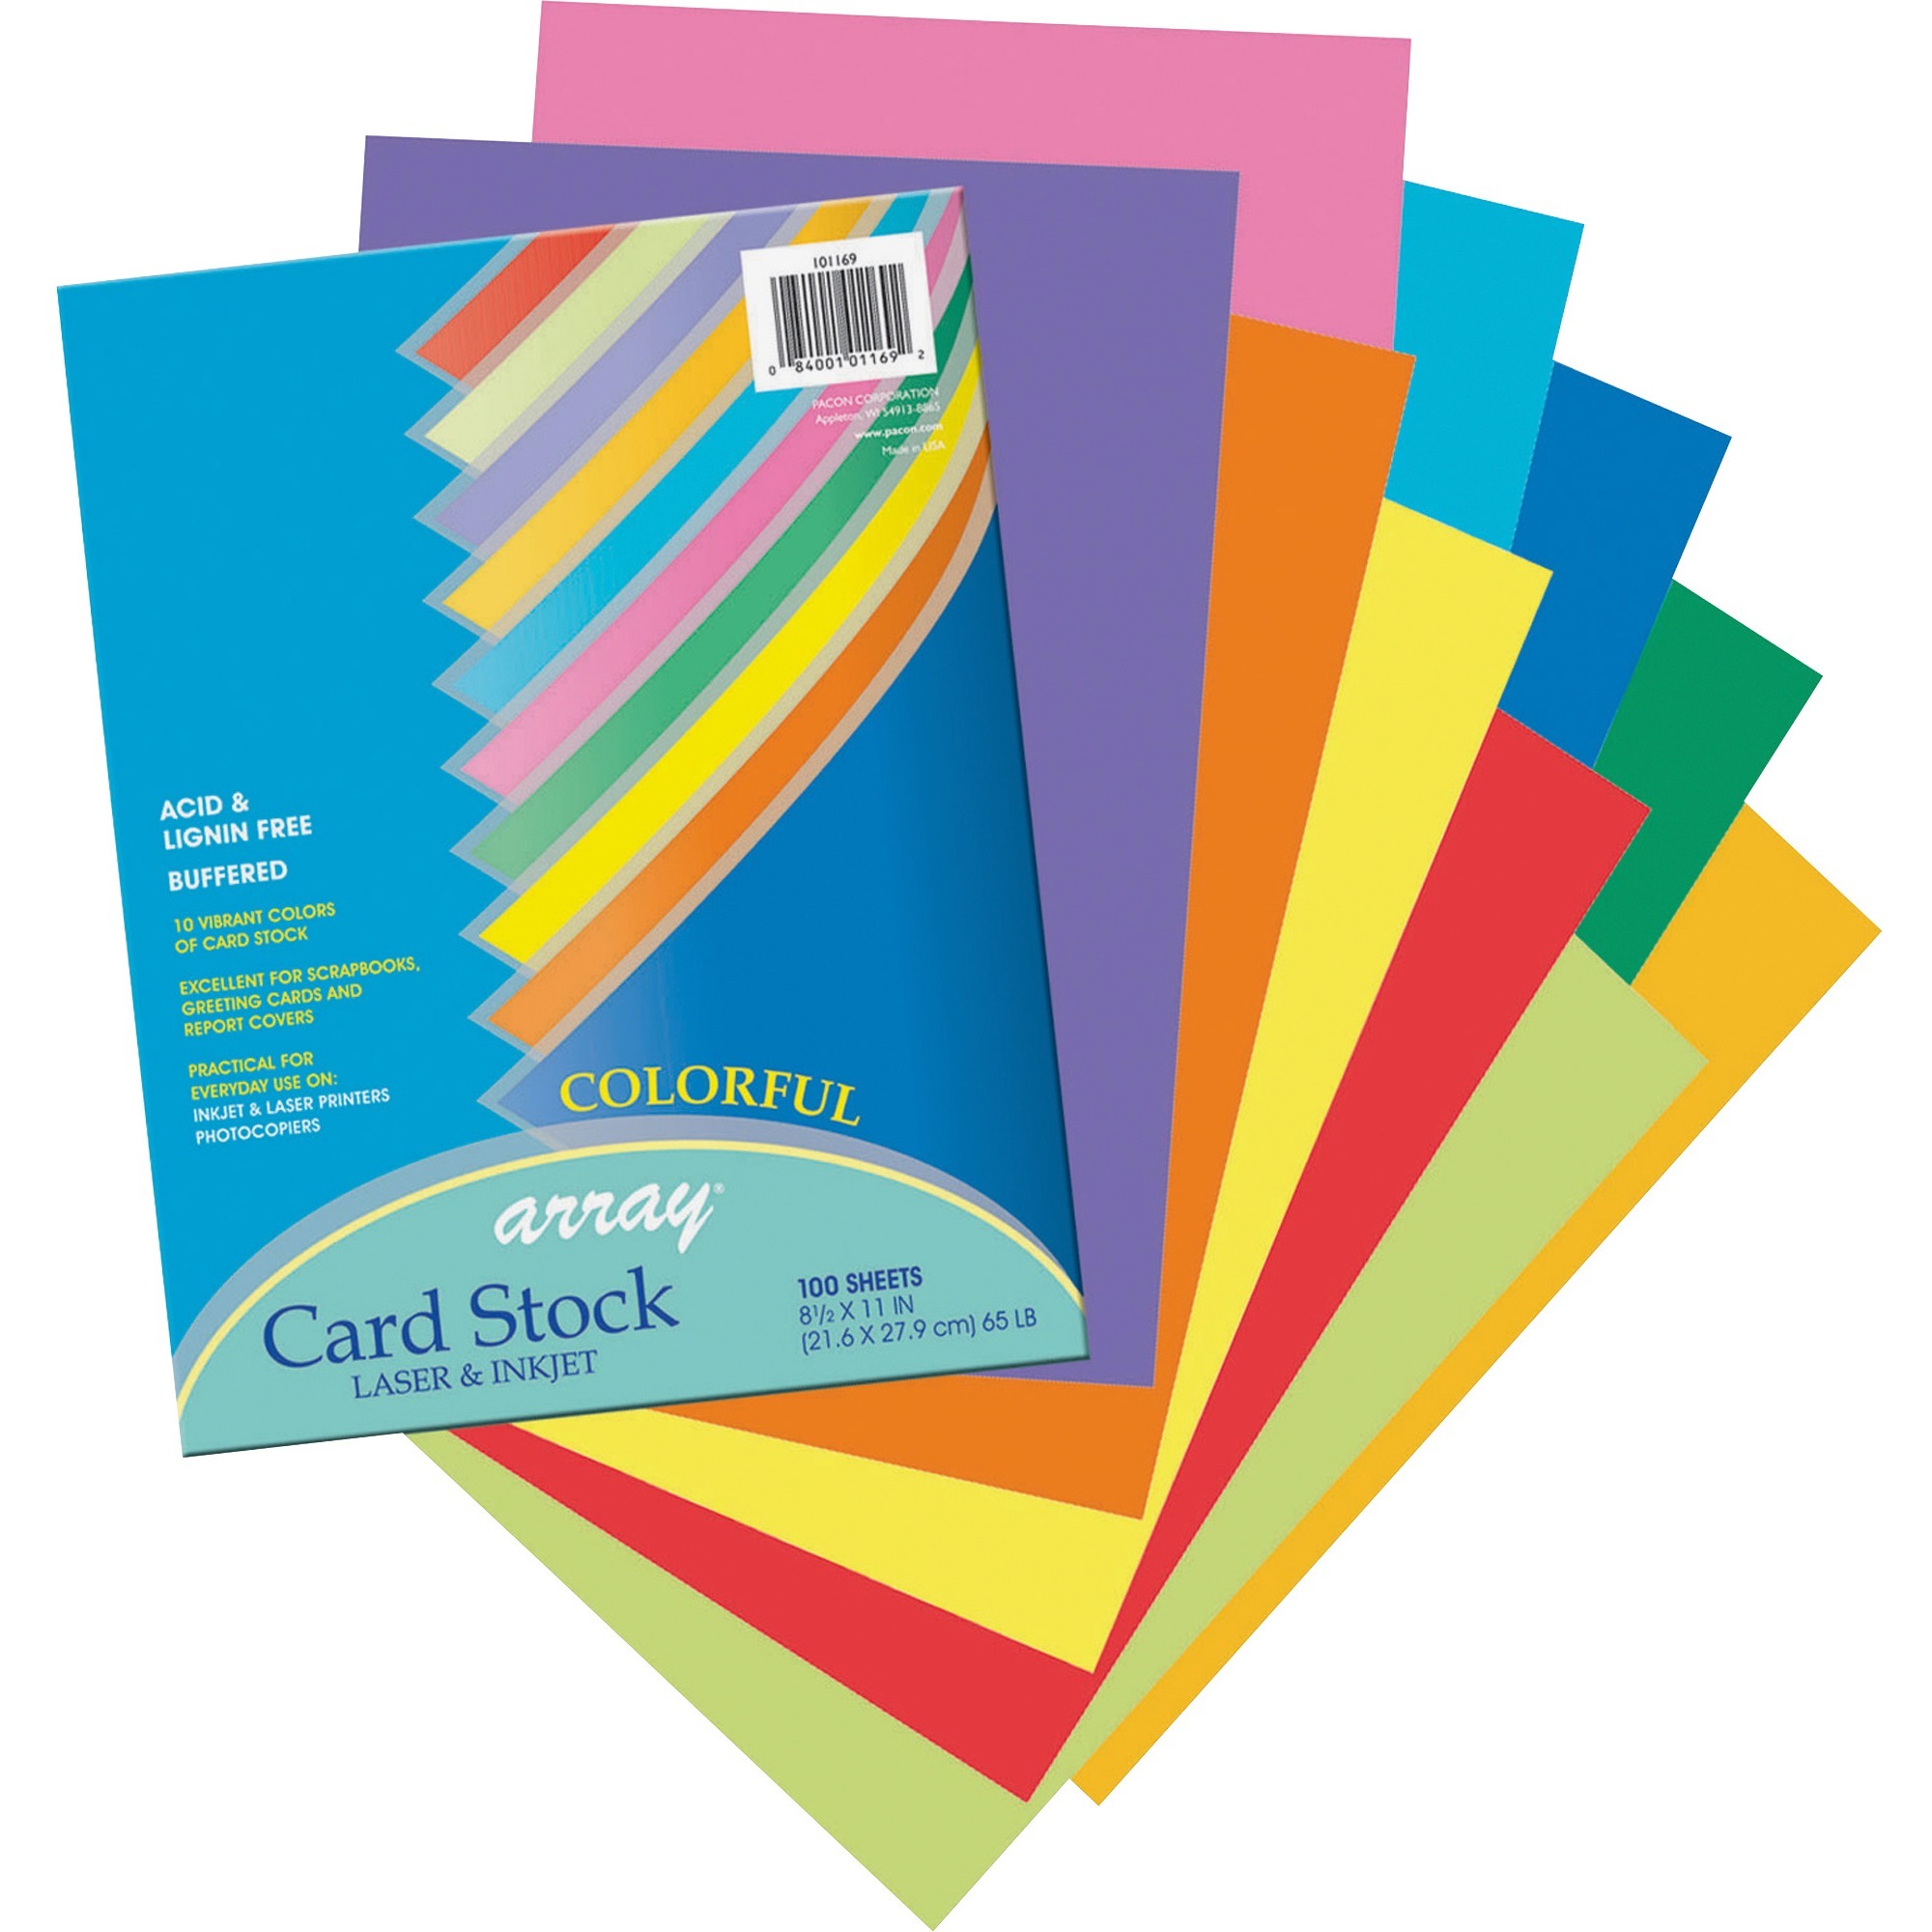 Colorful Card Stock